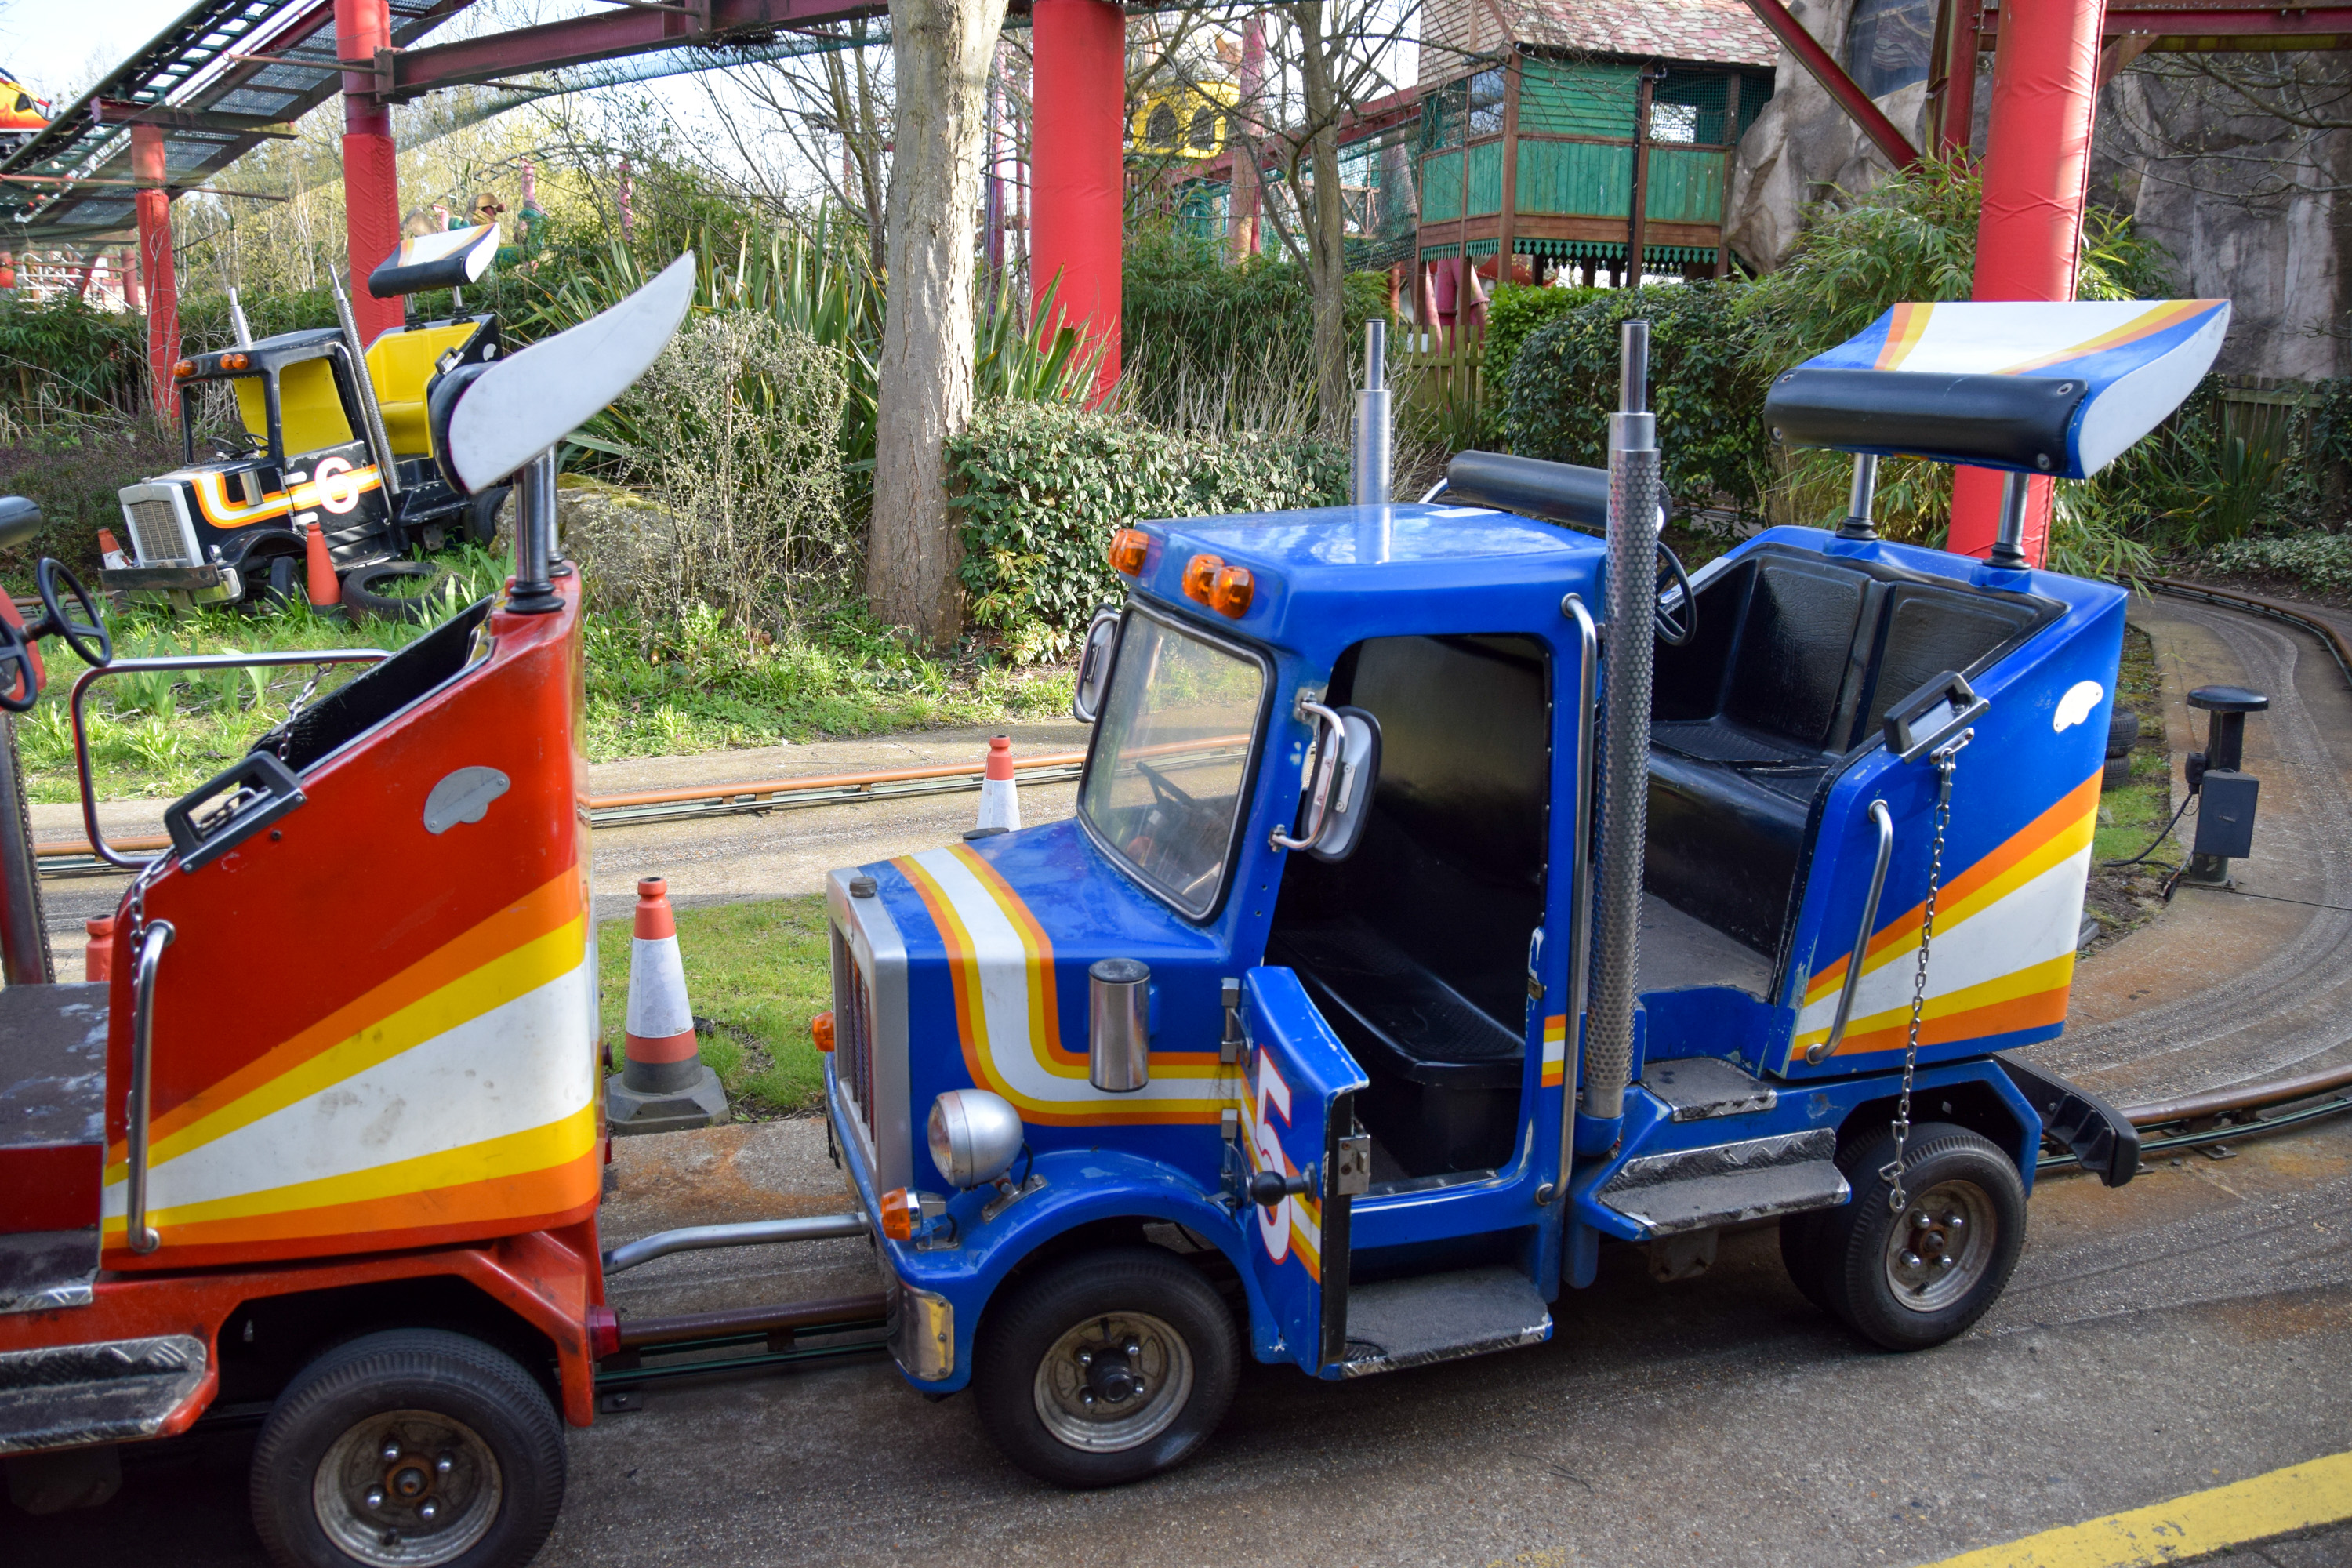 Tiny Truckers At Chessington Conjoined Rather Than Separate Trucks